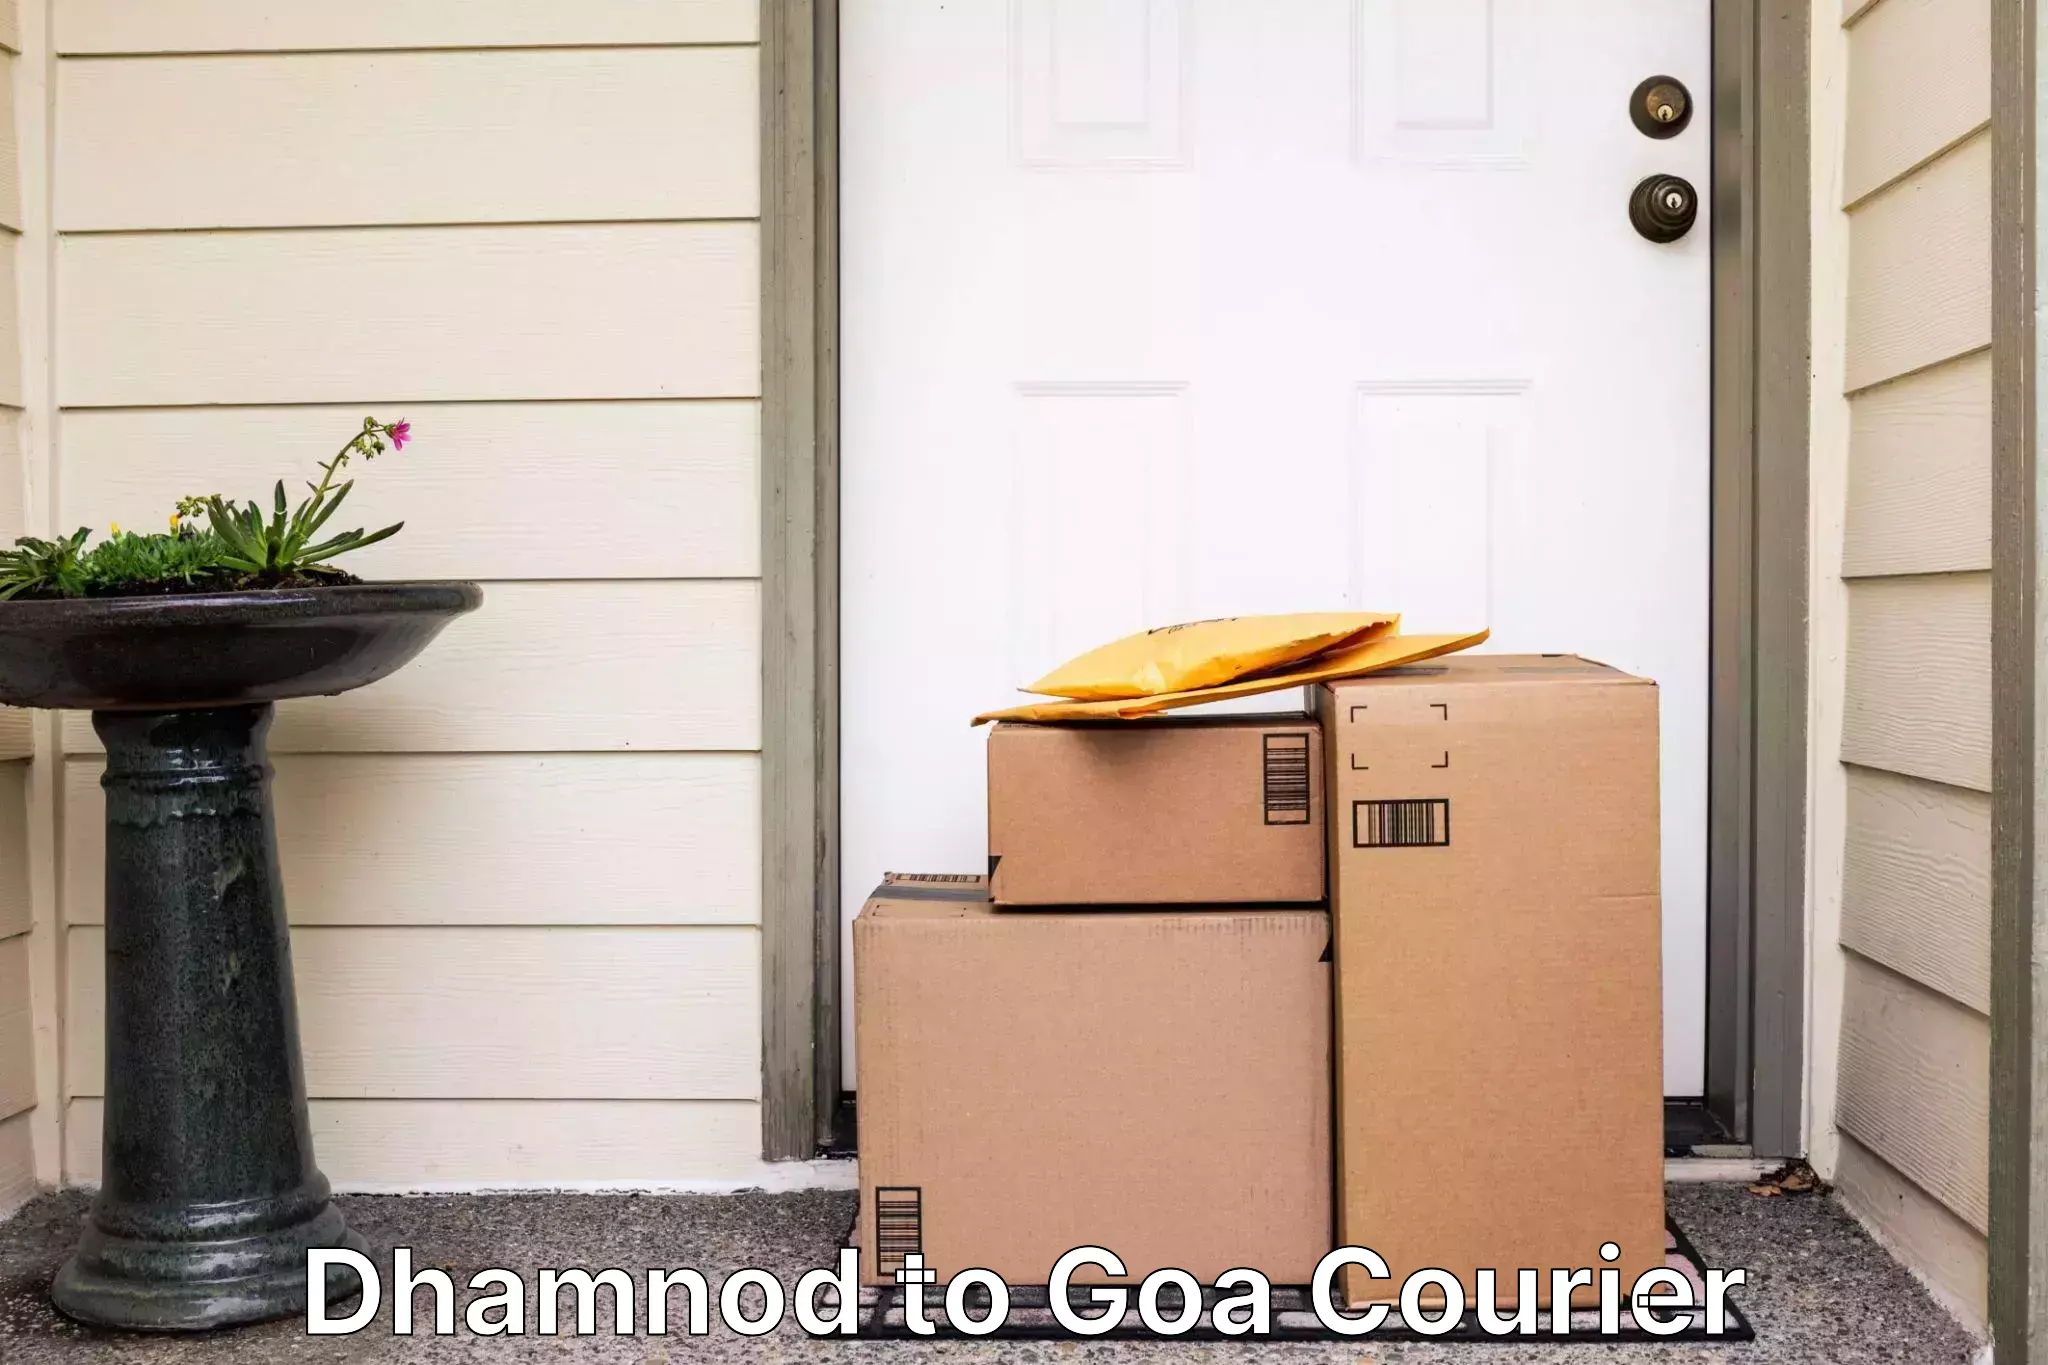 24-hour courier service Dhamnod to Goa